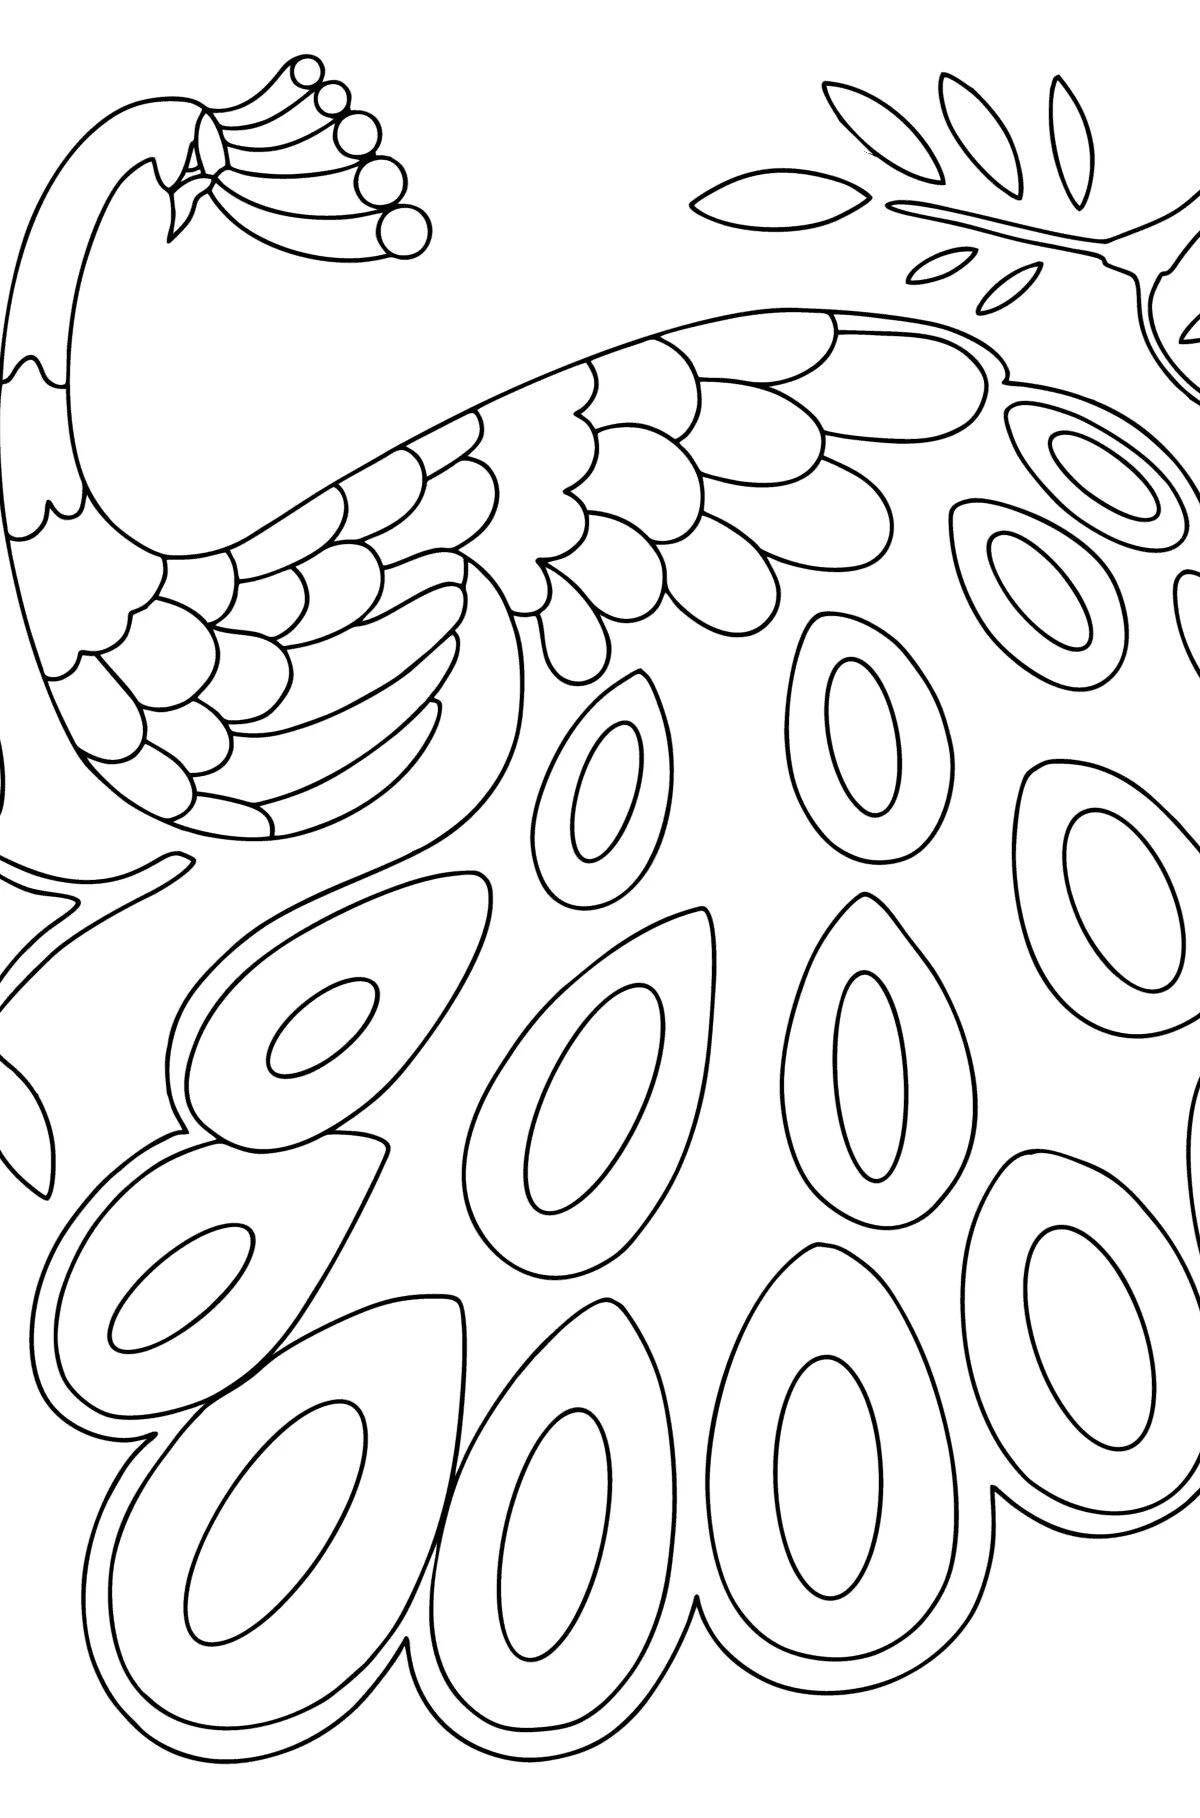 Rampant peacock feather coloring book for kids